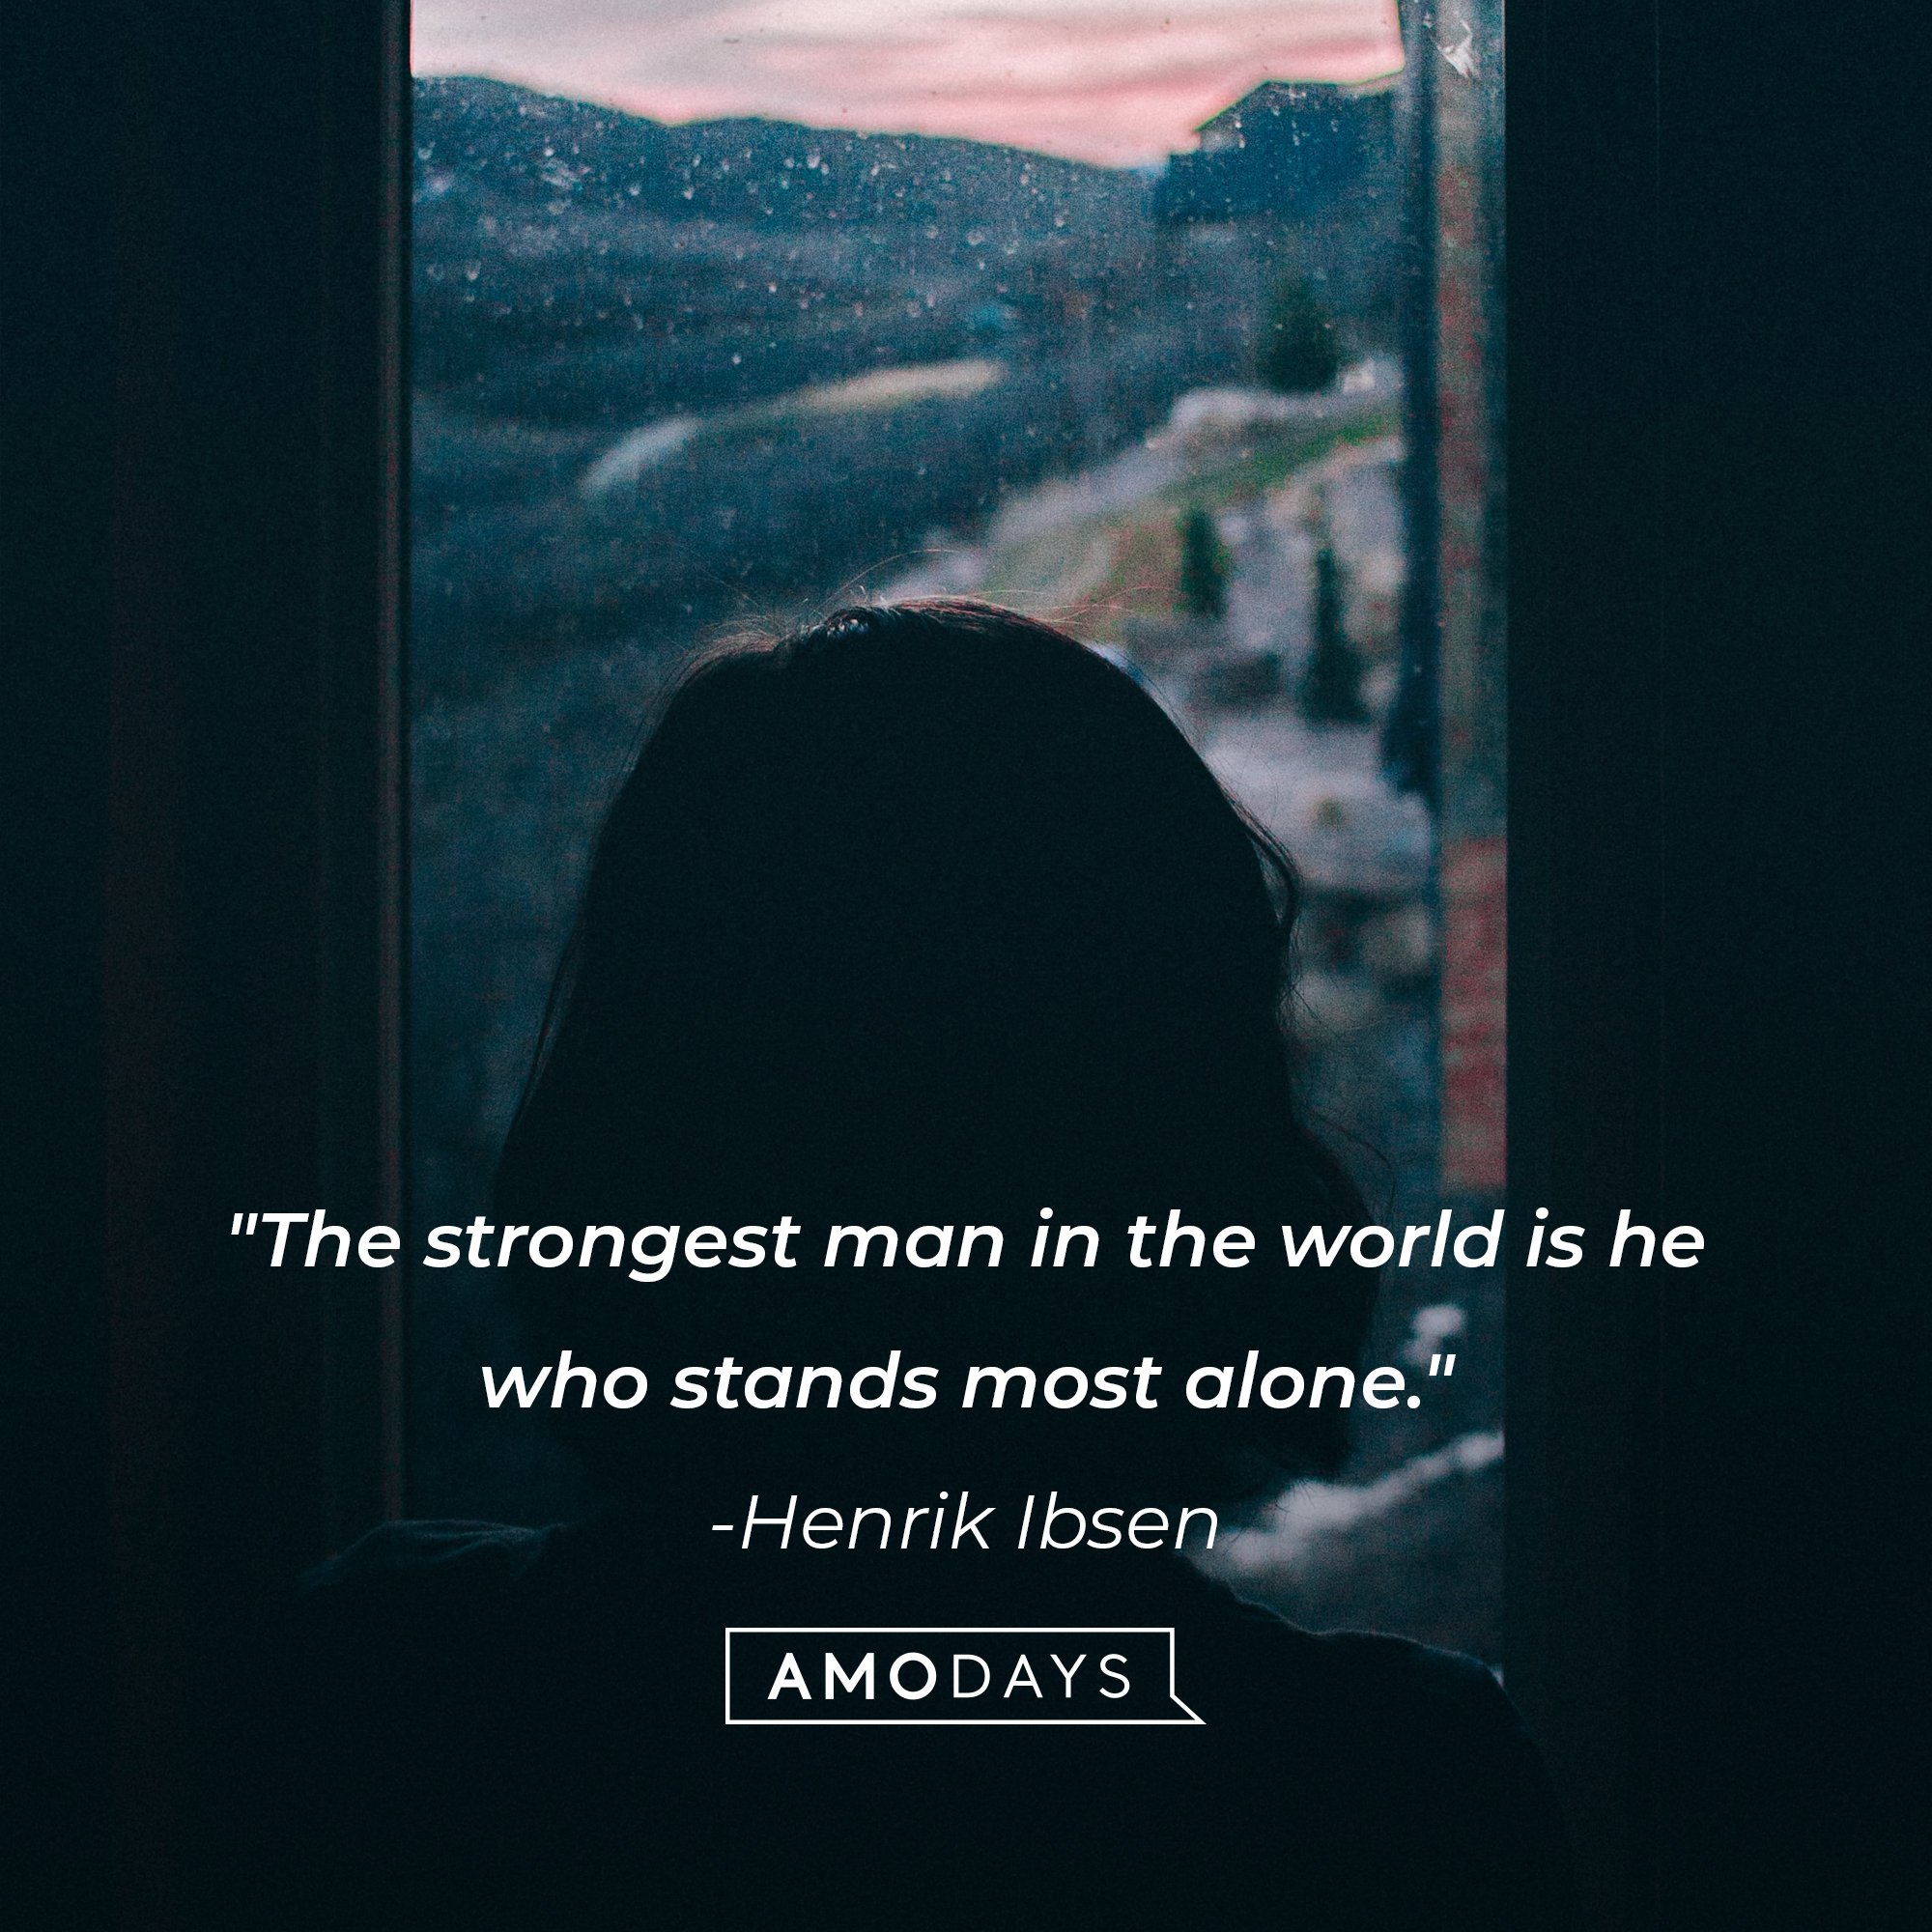 Henrik Ibsen’s quote: "The strongest man in the world is he who stands most alone." |  Image: AmoDays 